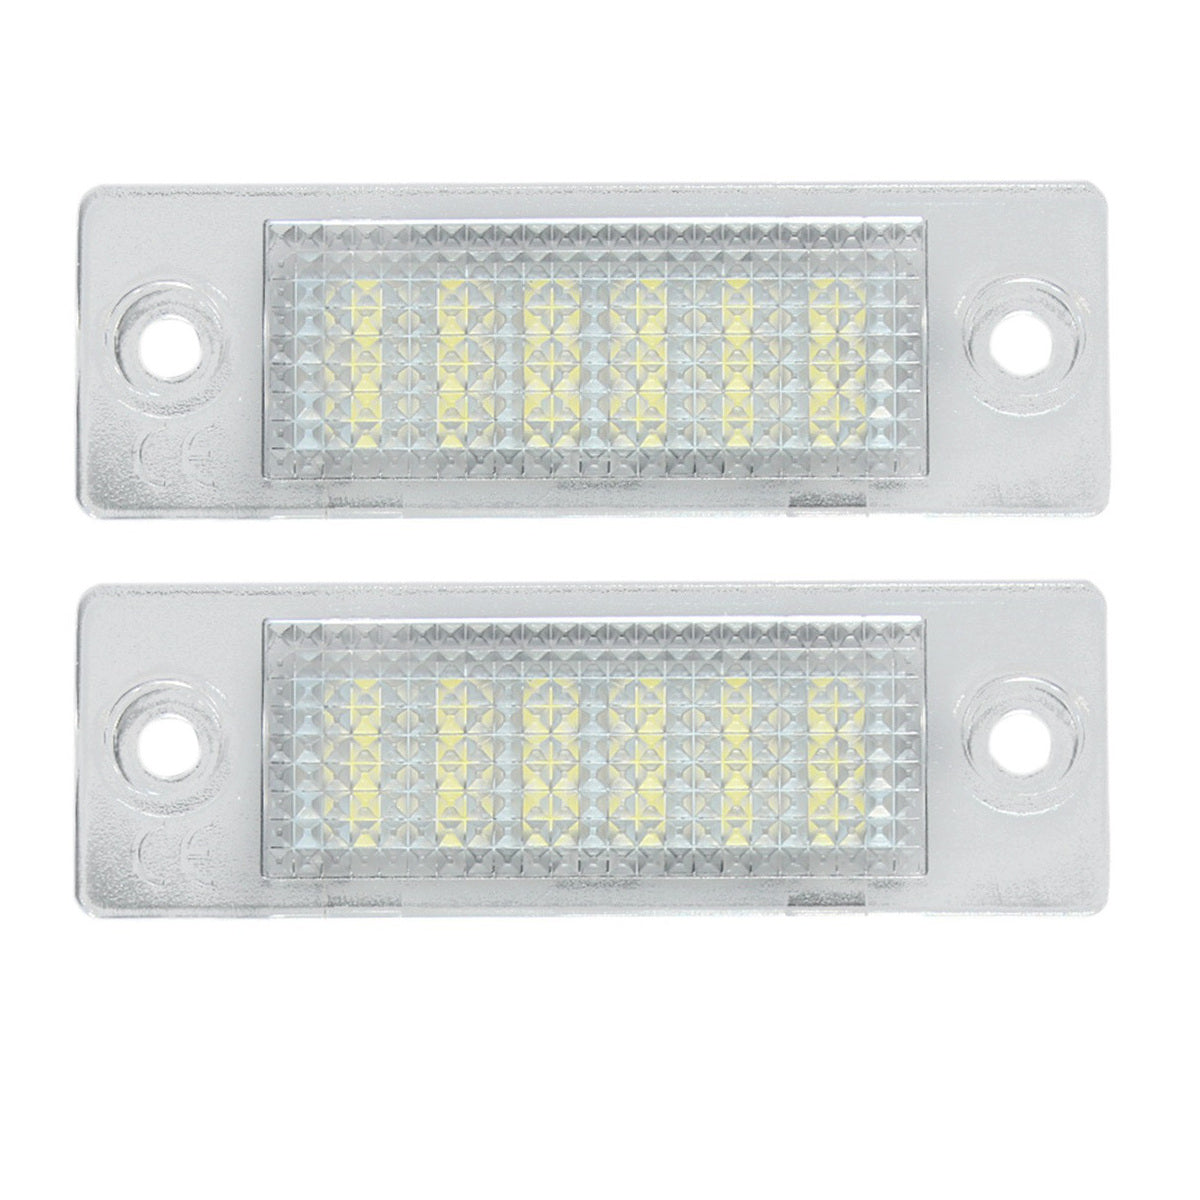 Gray 2x LED License Number Plate Light for VW Caddy T5 Golf Passat